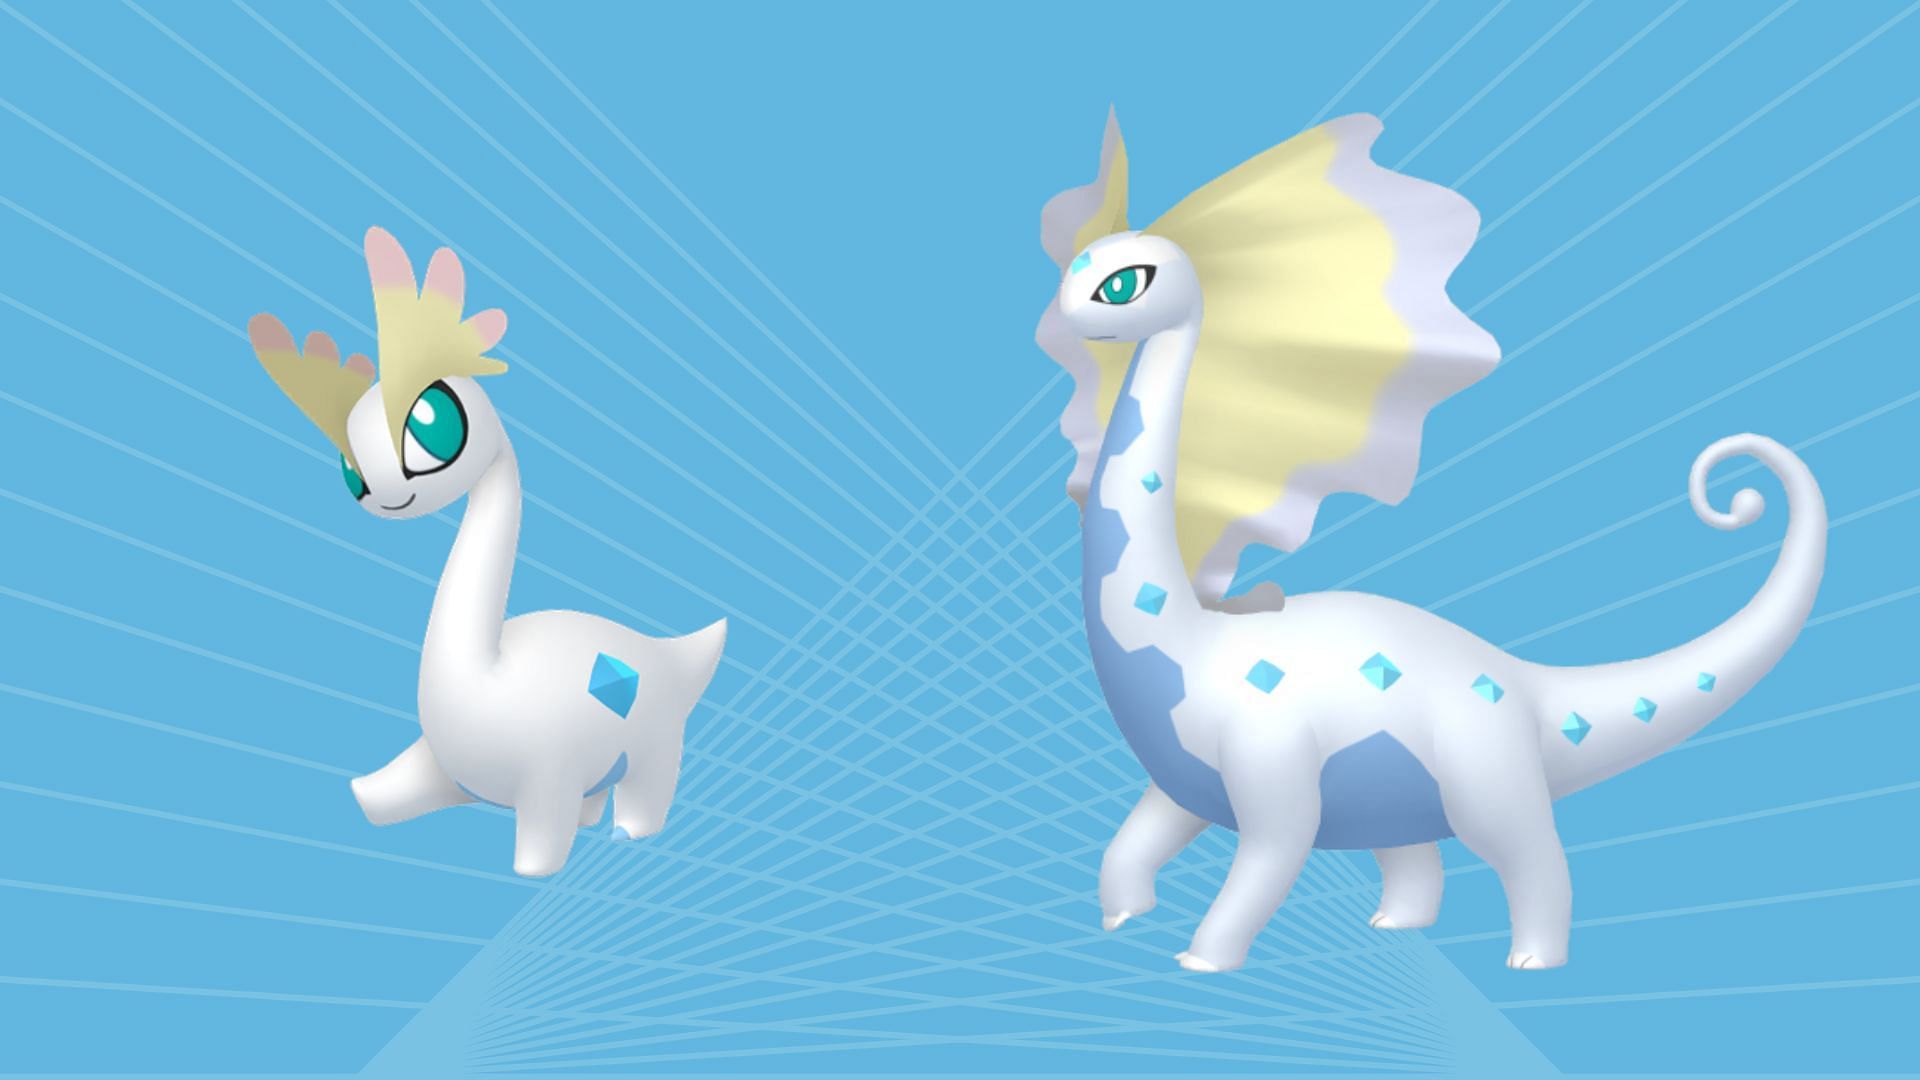 All Shiny Baby Pokemon in Pokemon GO, ranked from worst to best